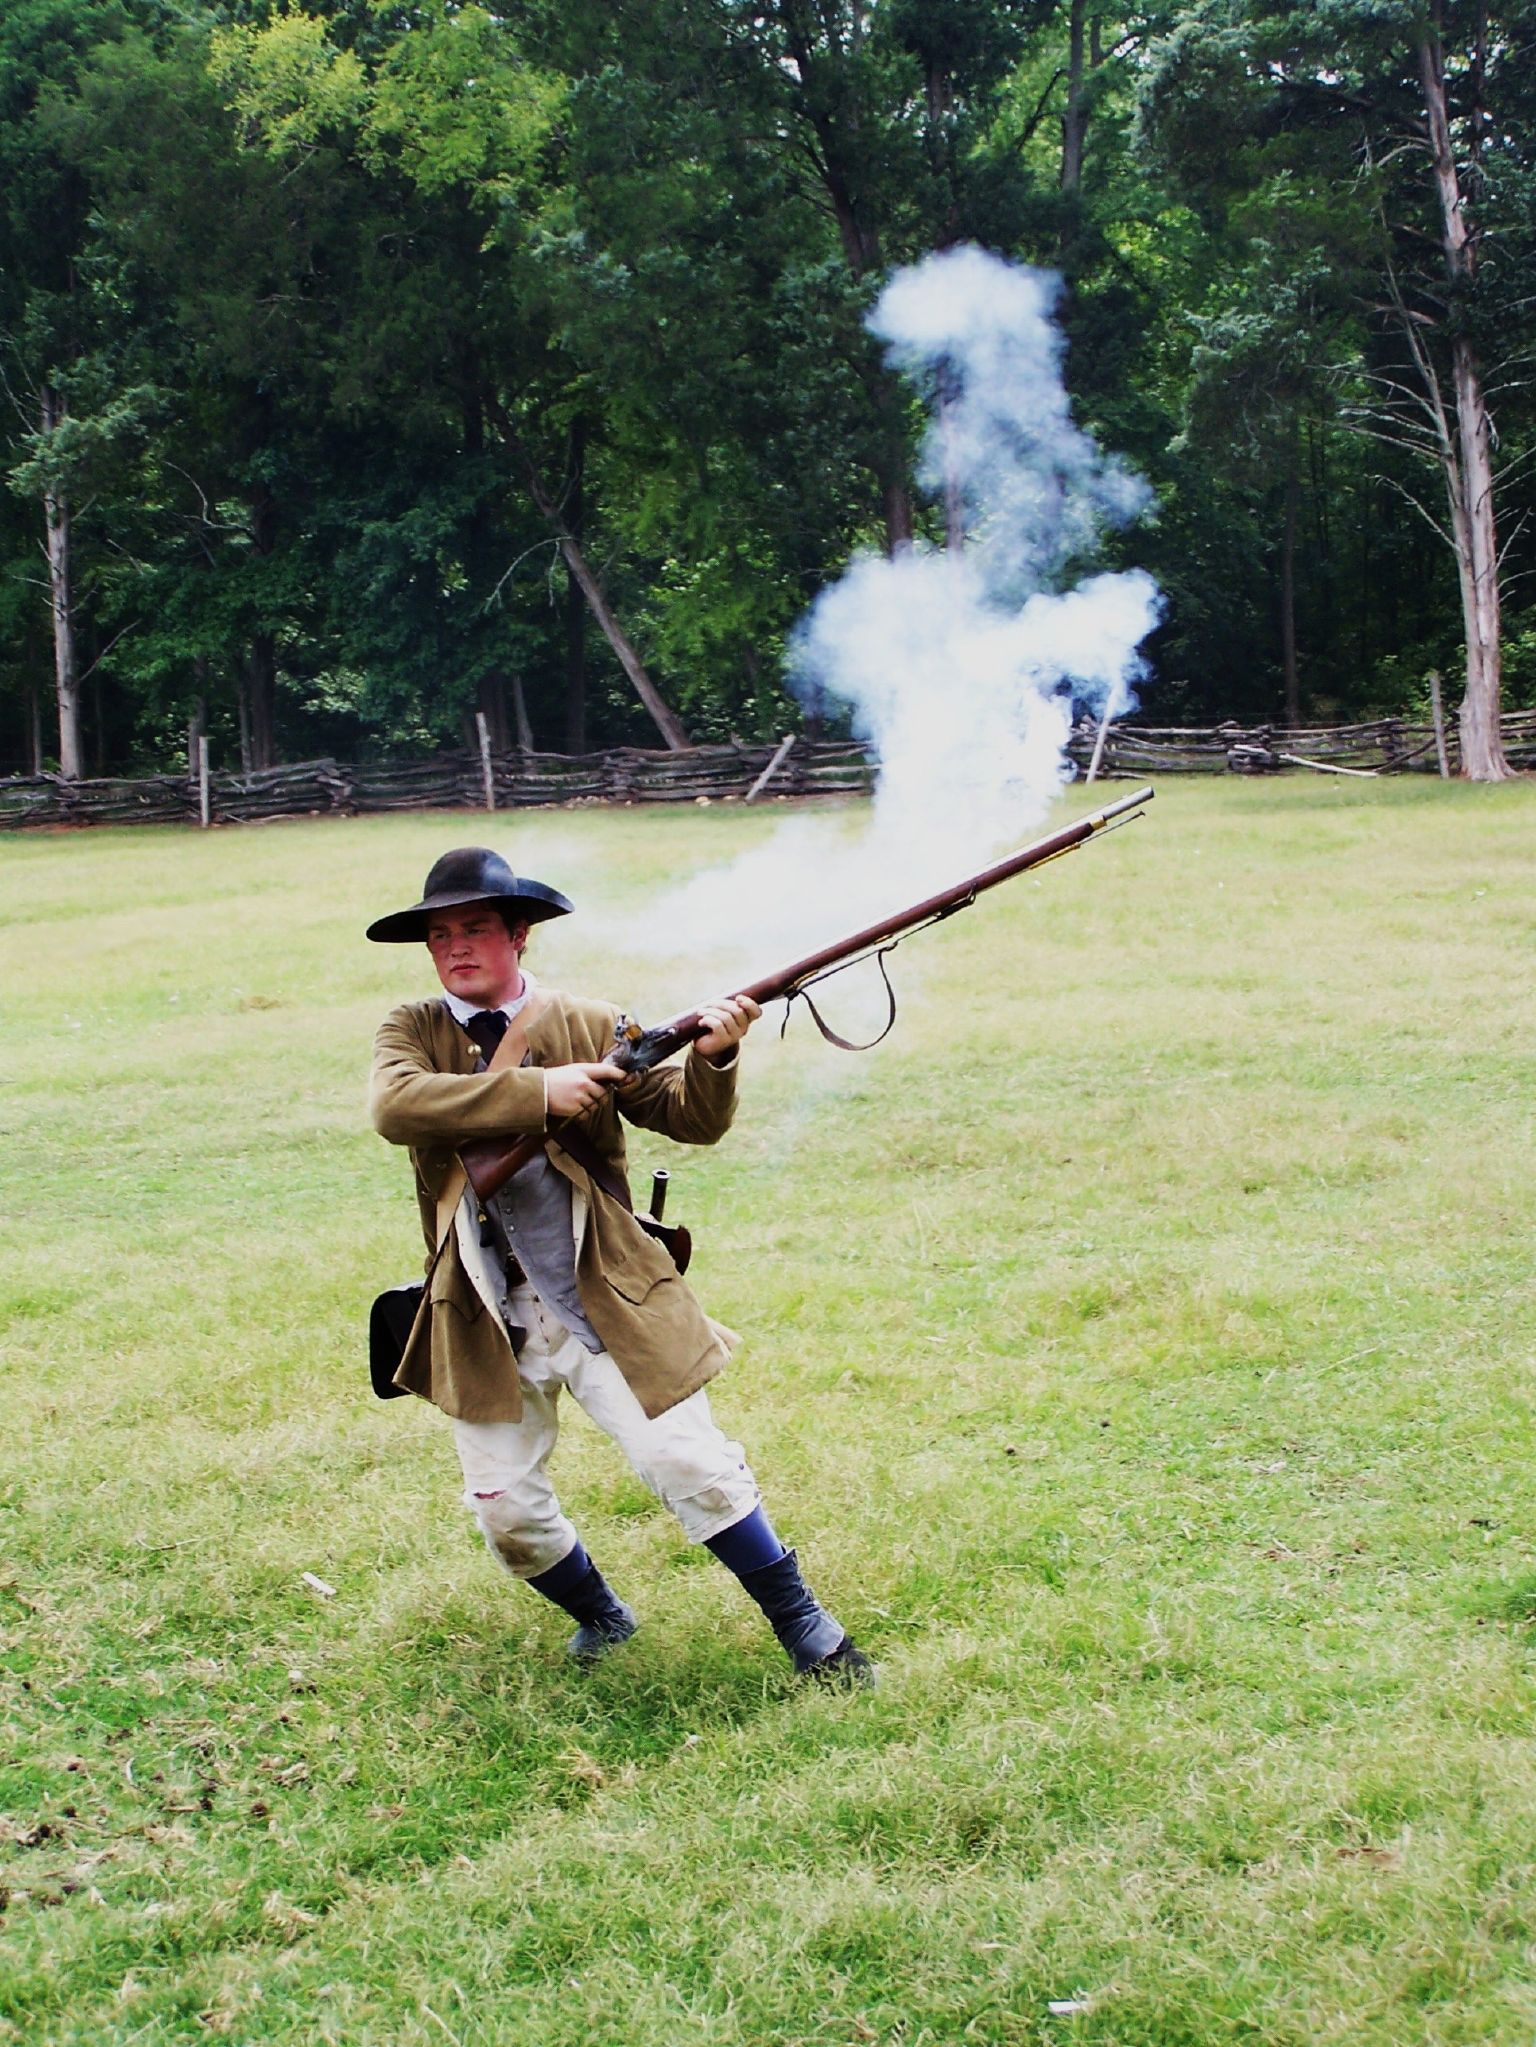 a man in a civil era costume is aiming a rifle at soing